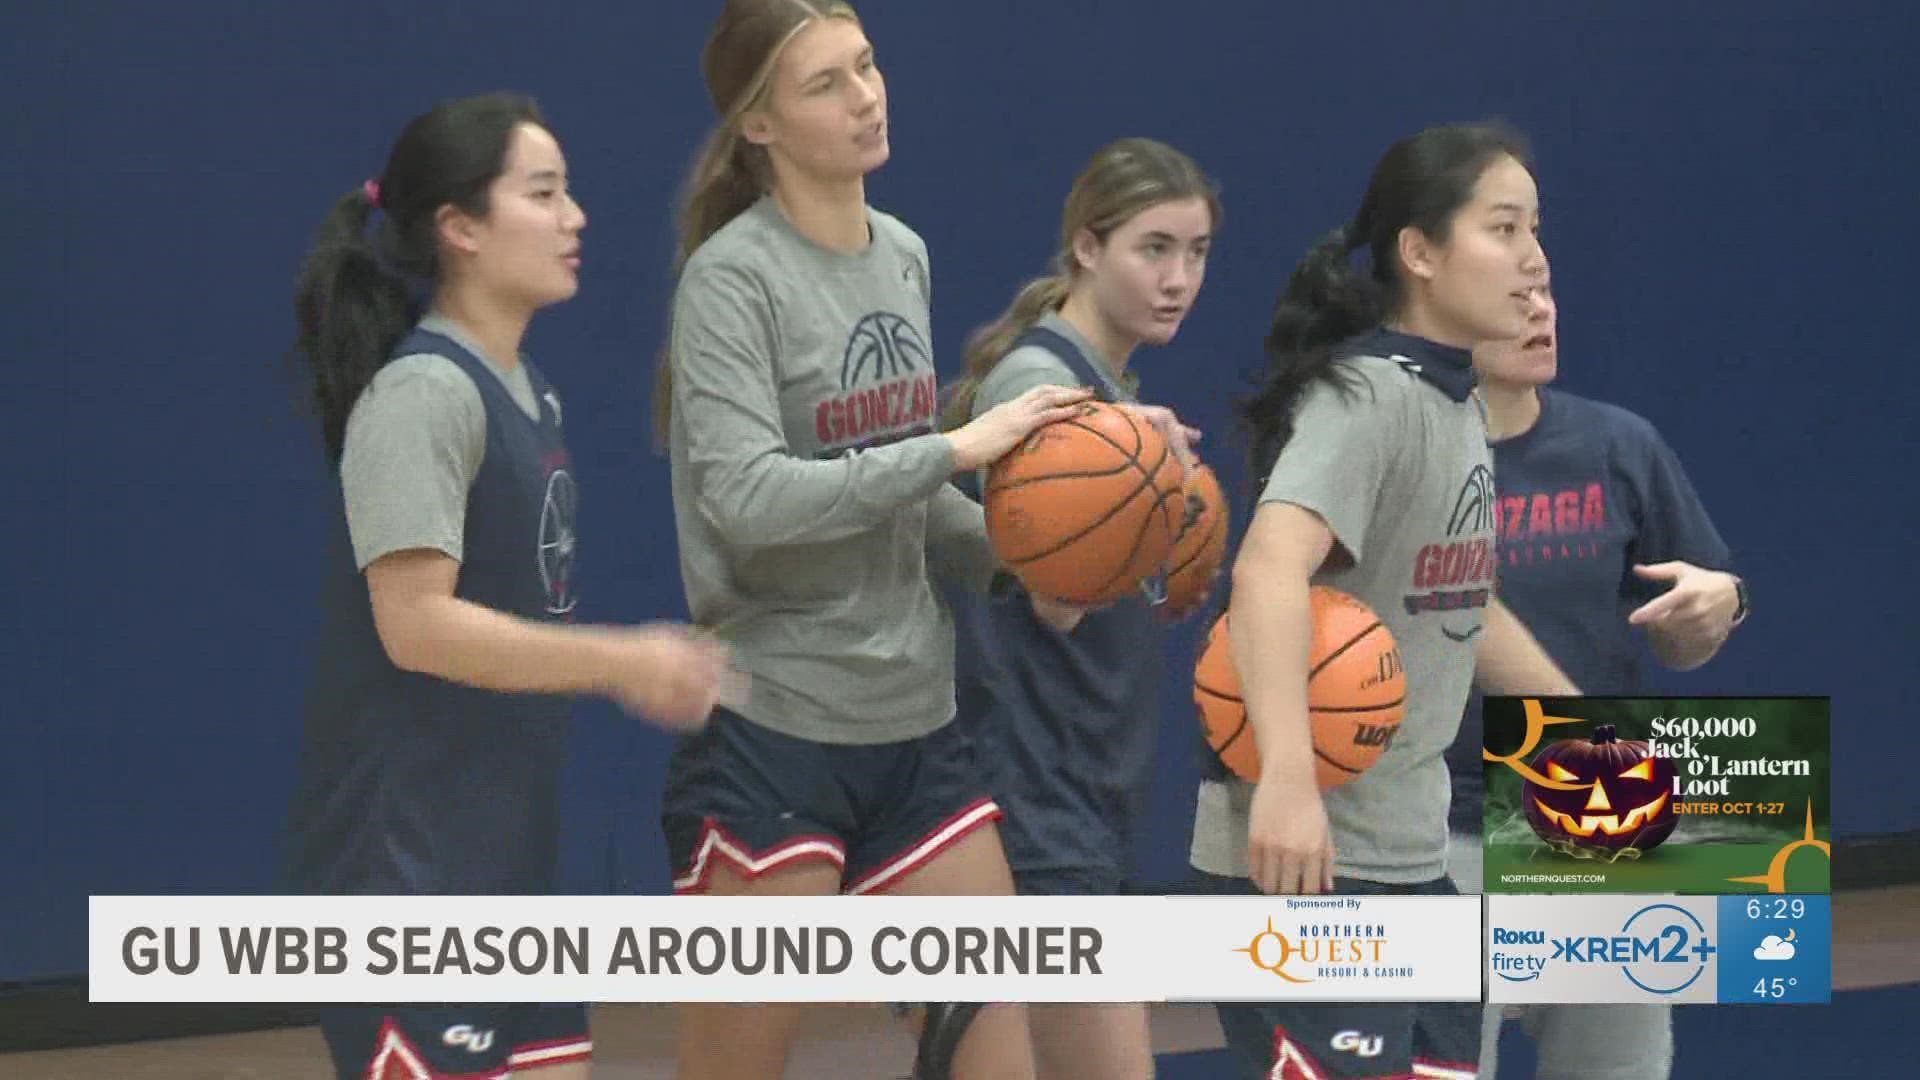 Gonzaga women's basketball is putting on the finishing touches before the start of the 2022-23 season. GU opens with an exhibition game against Western Washington on